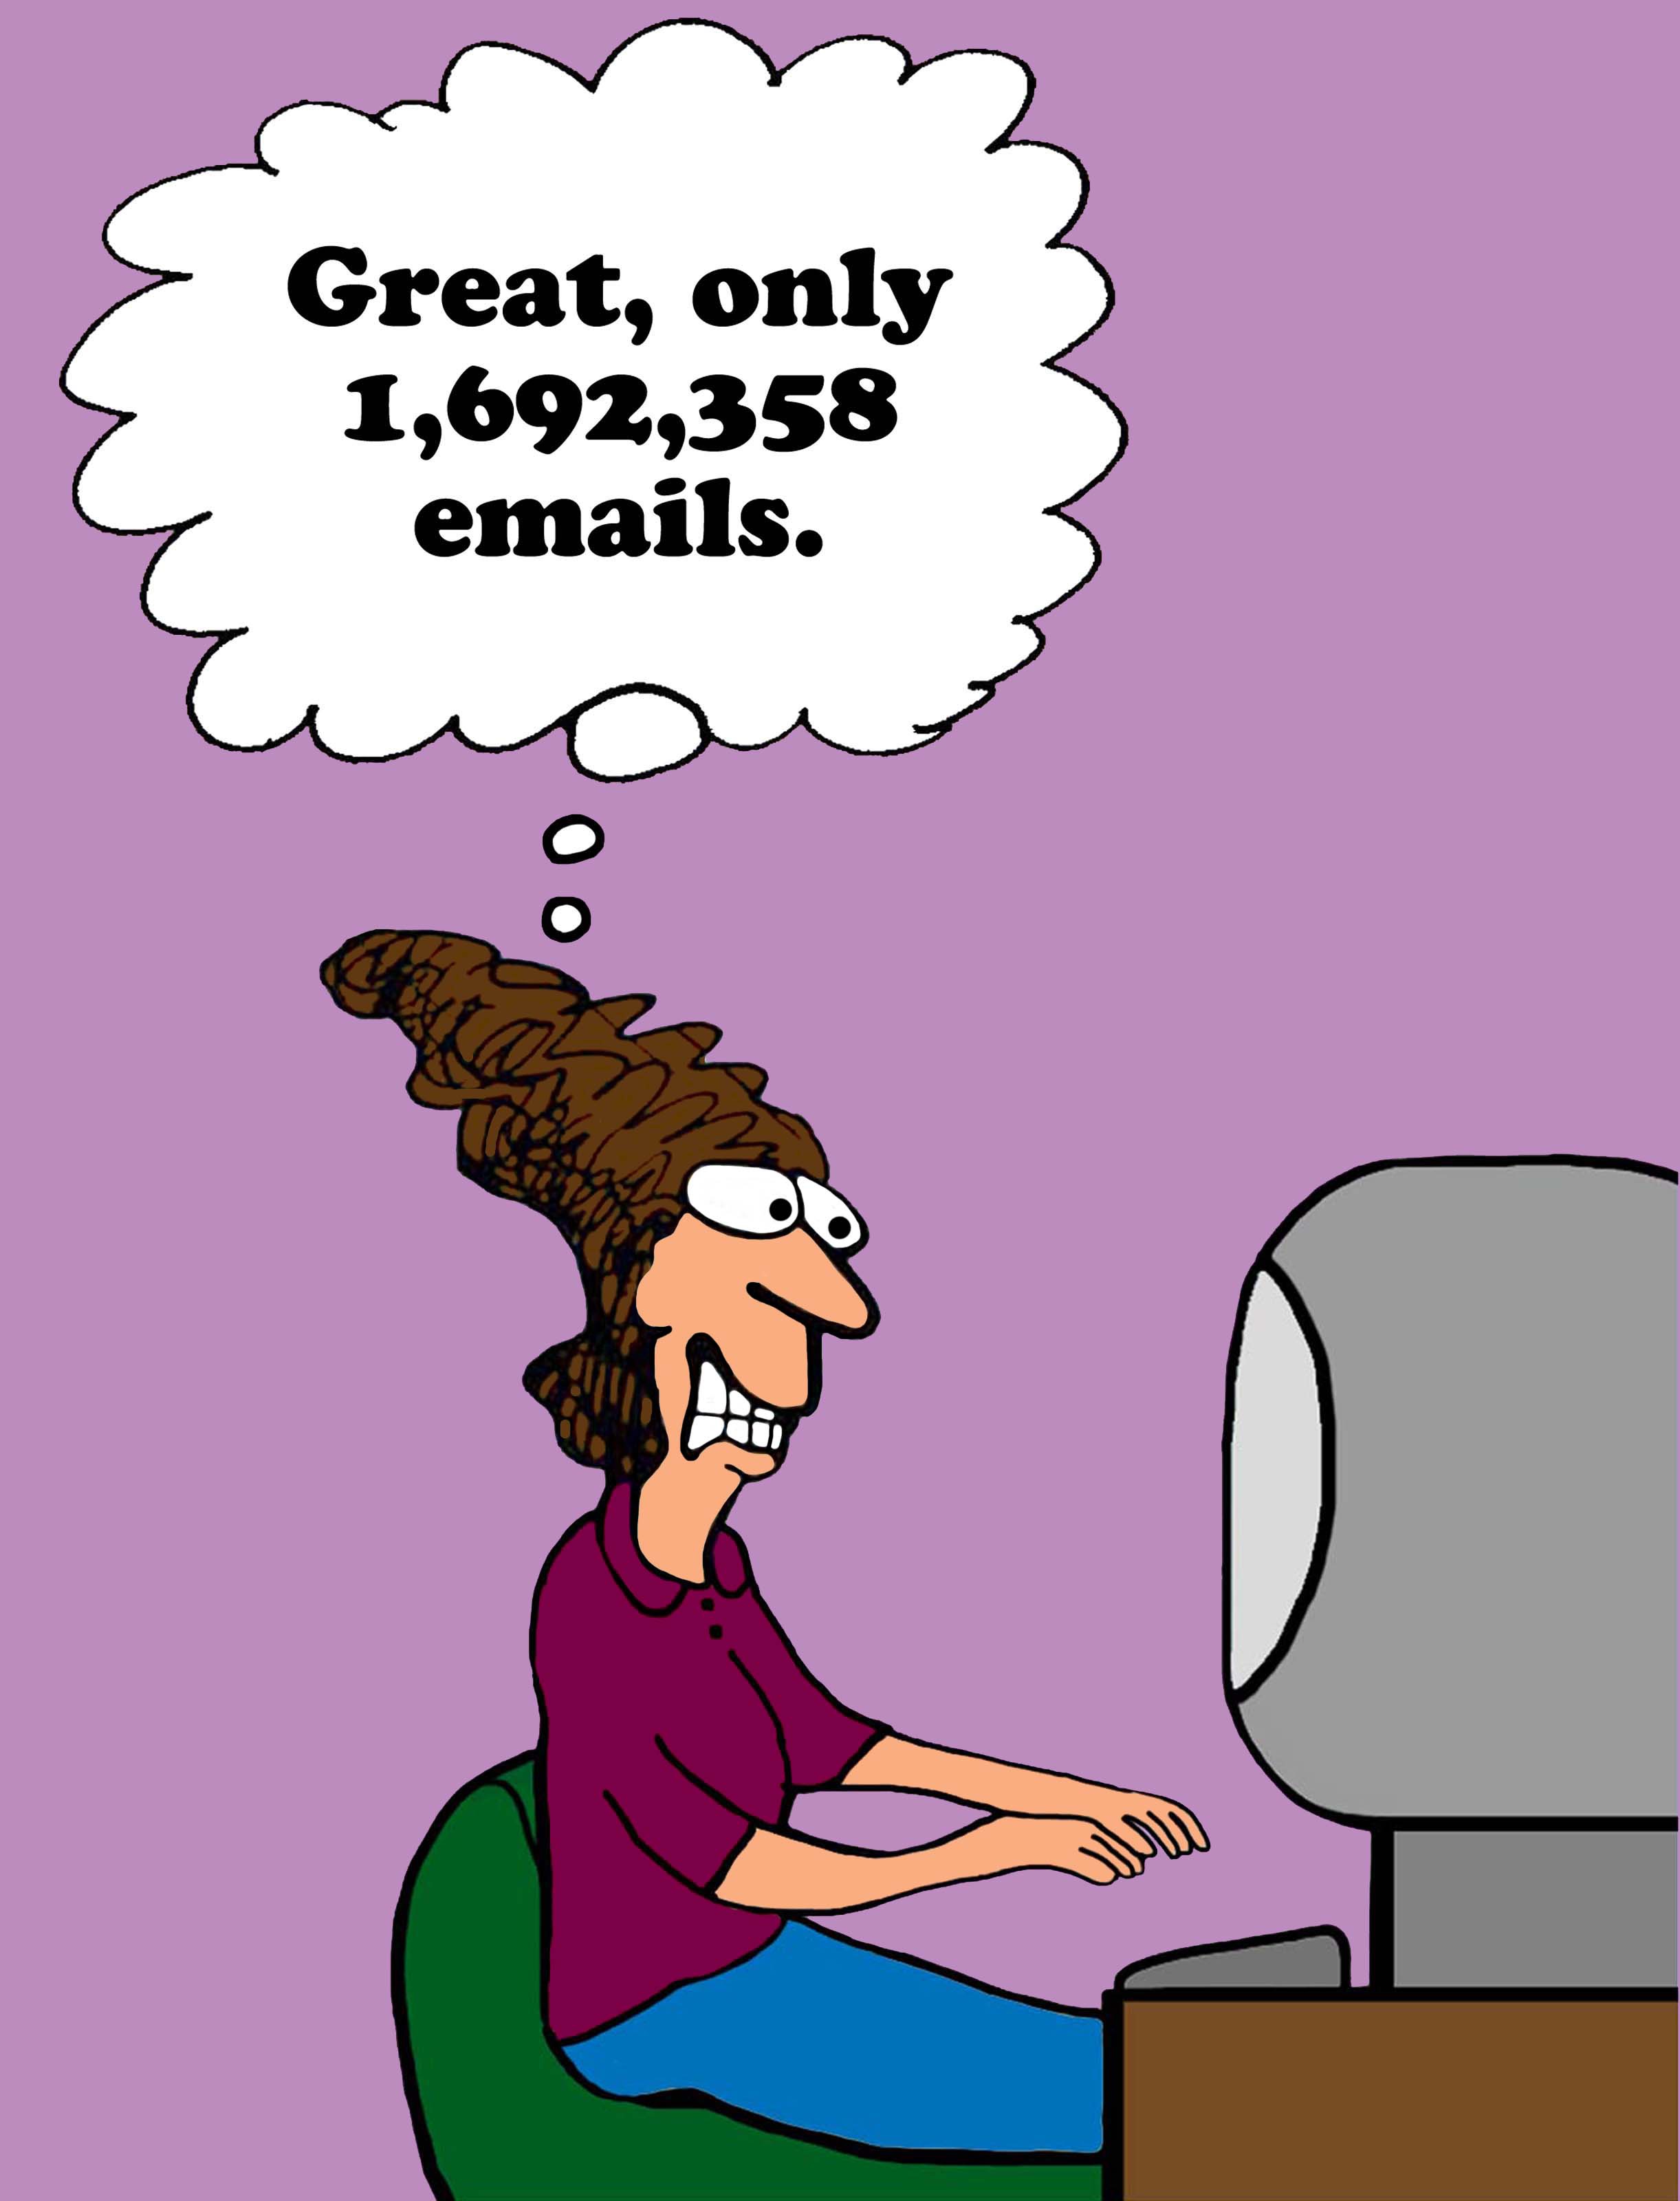 Business cartoon about too many emails.